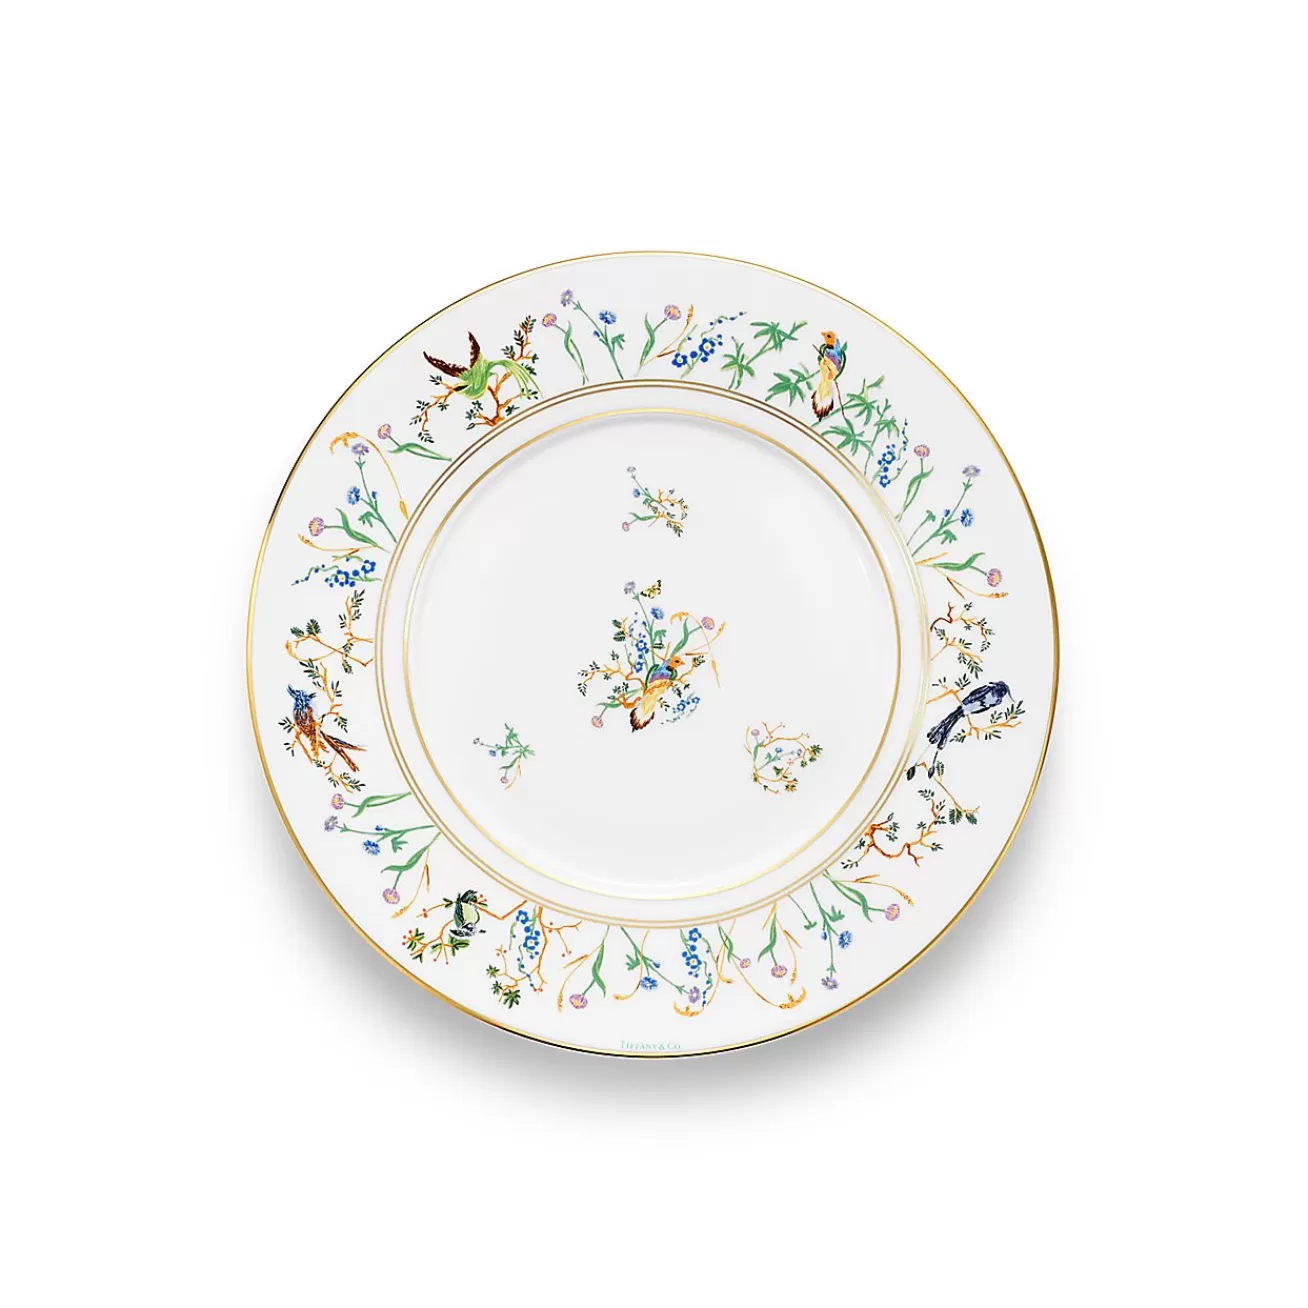 Tiffany & Co. Tiffany Jardin Dessert Plate in Porcelain | ^ The Home | Housewarming Gifts